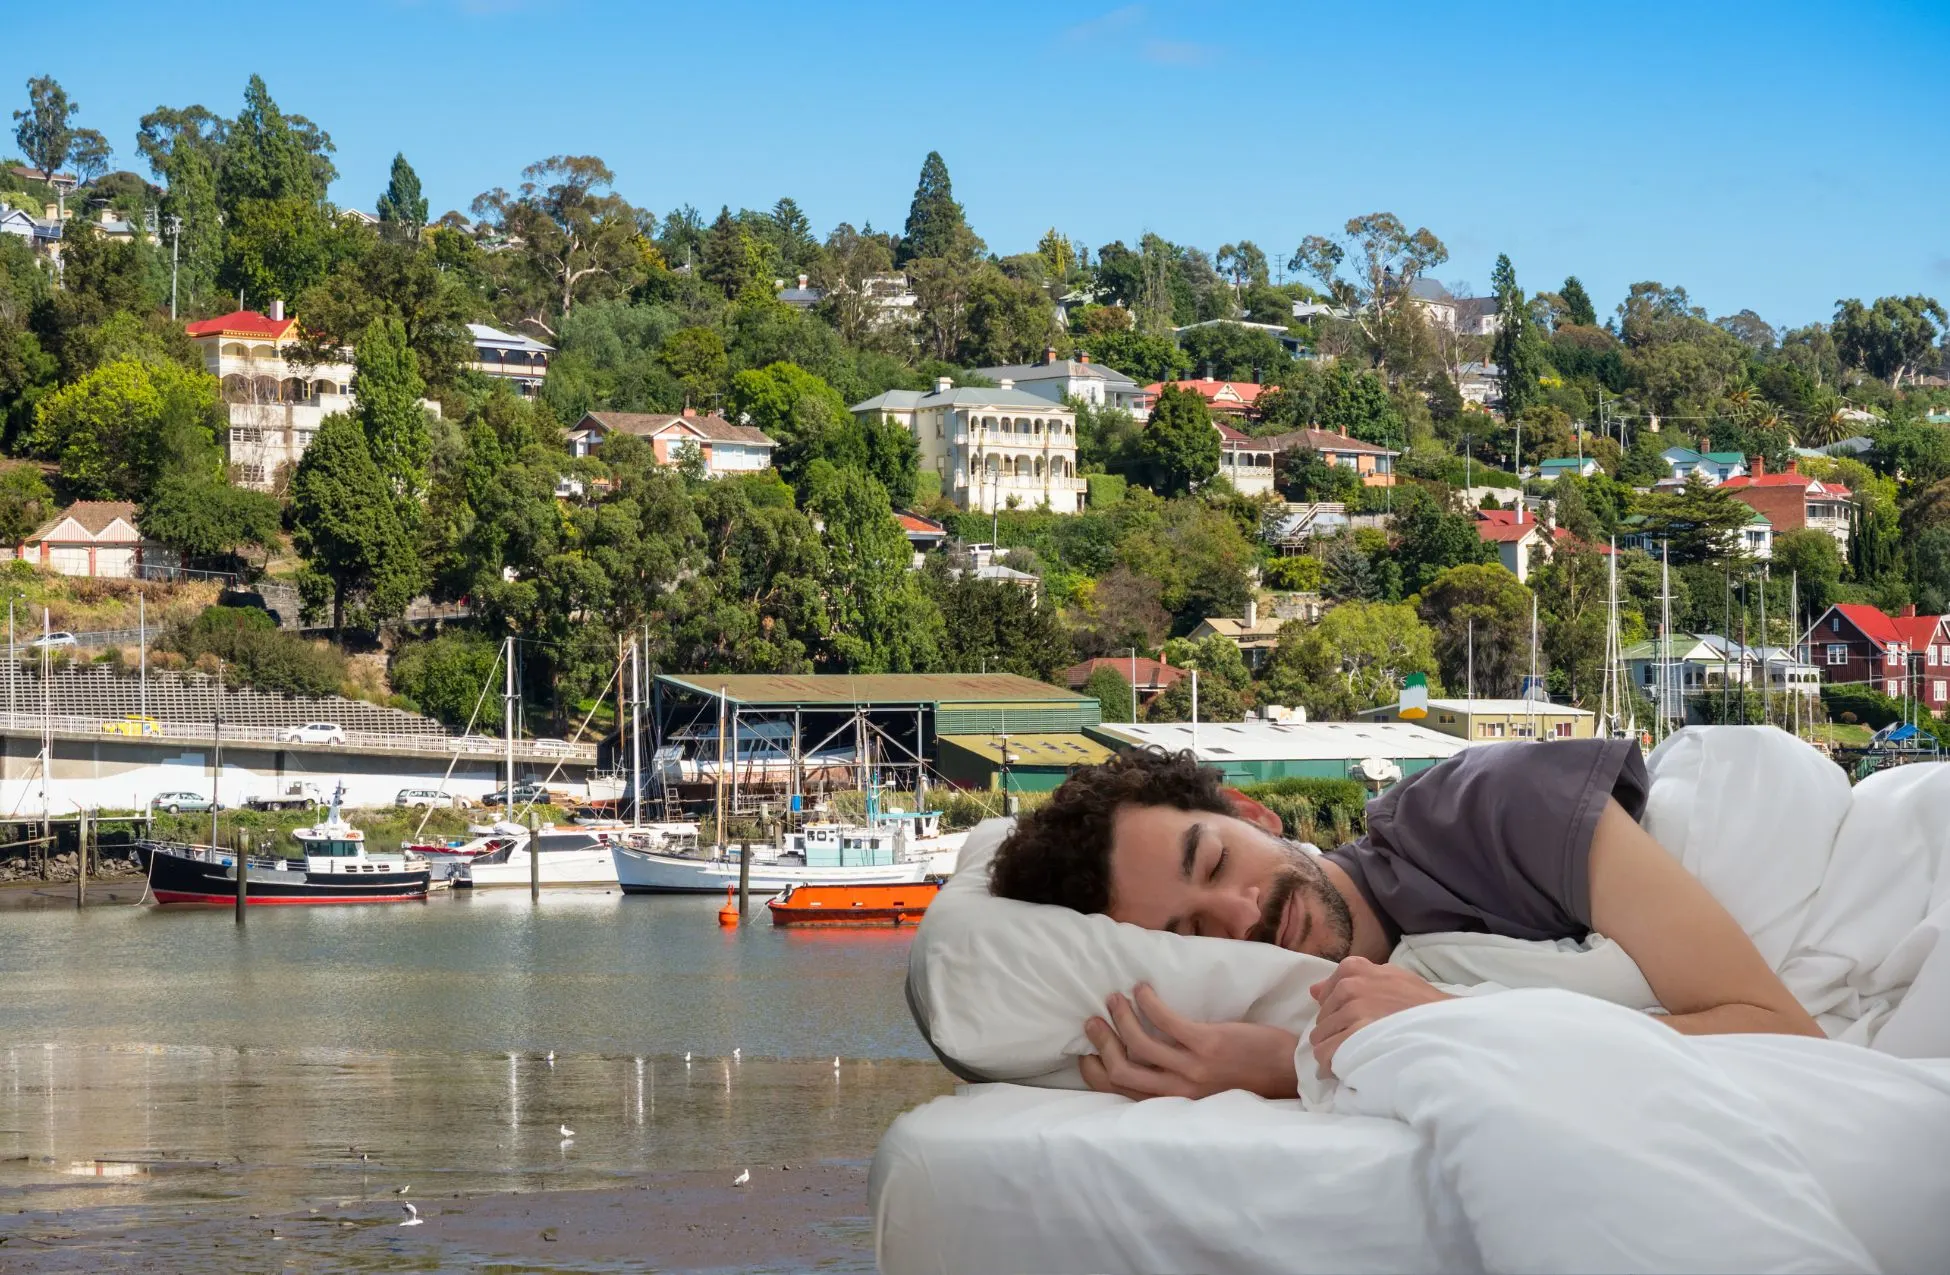 Best Hotels In Launceston Top Picks For An Exciting Stay